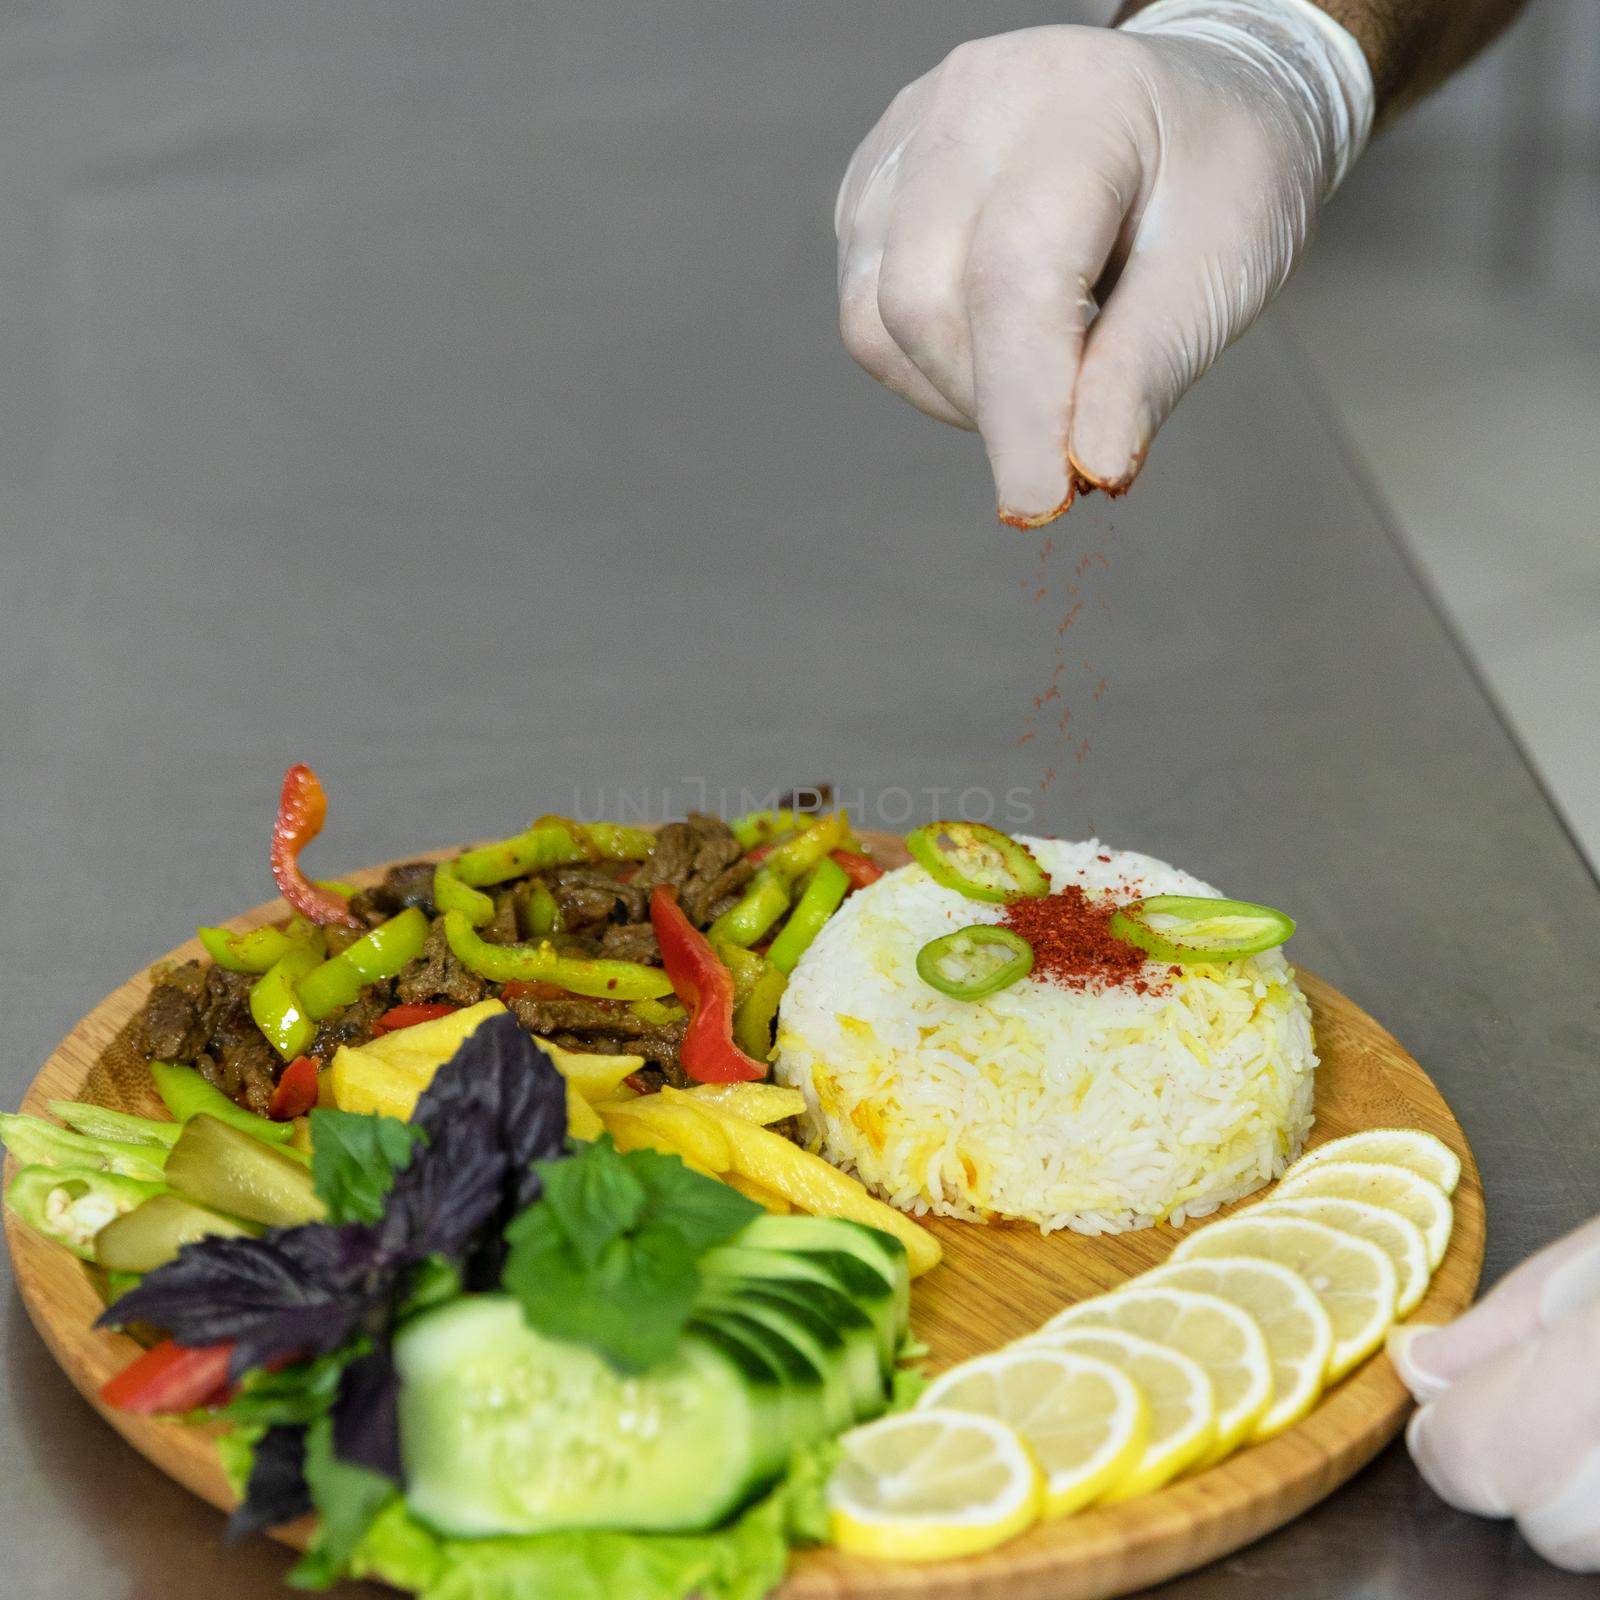 Restaurant chef pouring pepper to a salad meat meal by ferhad